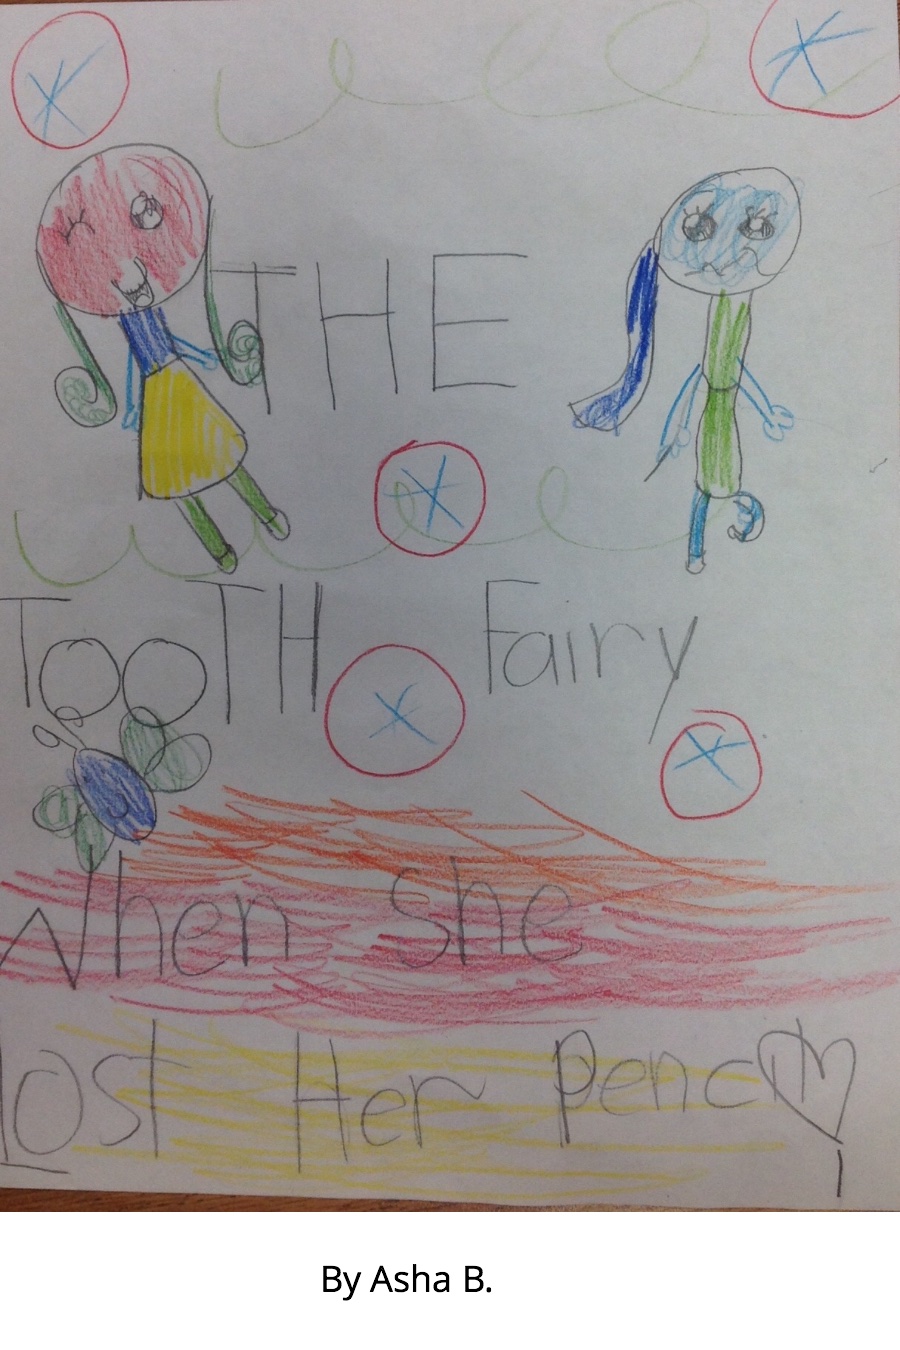 The Tooth Fairy When She Lost Her Pencil by Asha B